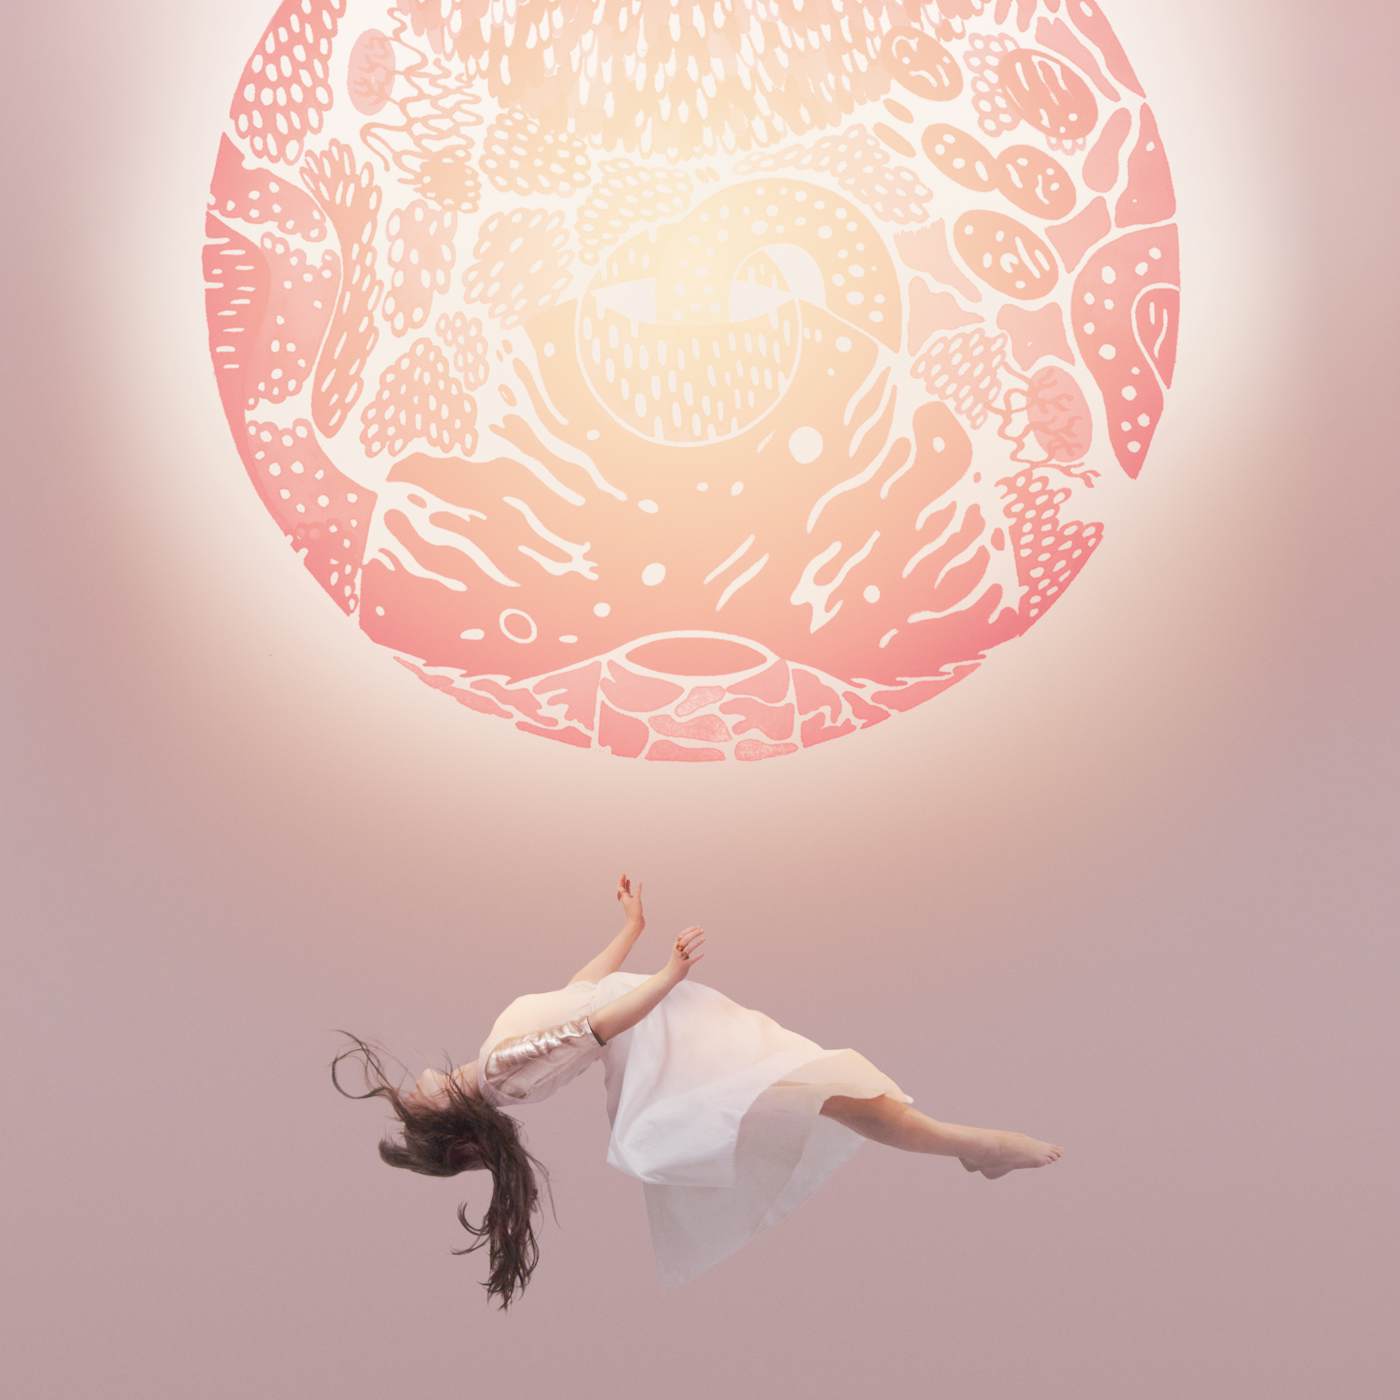 Purity Ring ANOTHER ETERNITY Vinyl Record - Colored Vinyl, Limited Edition